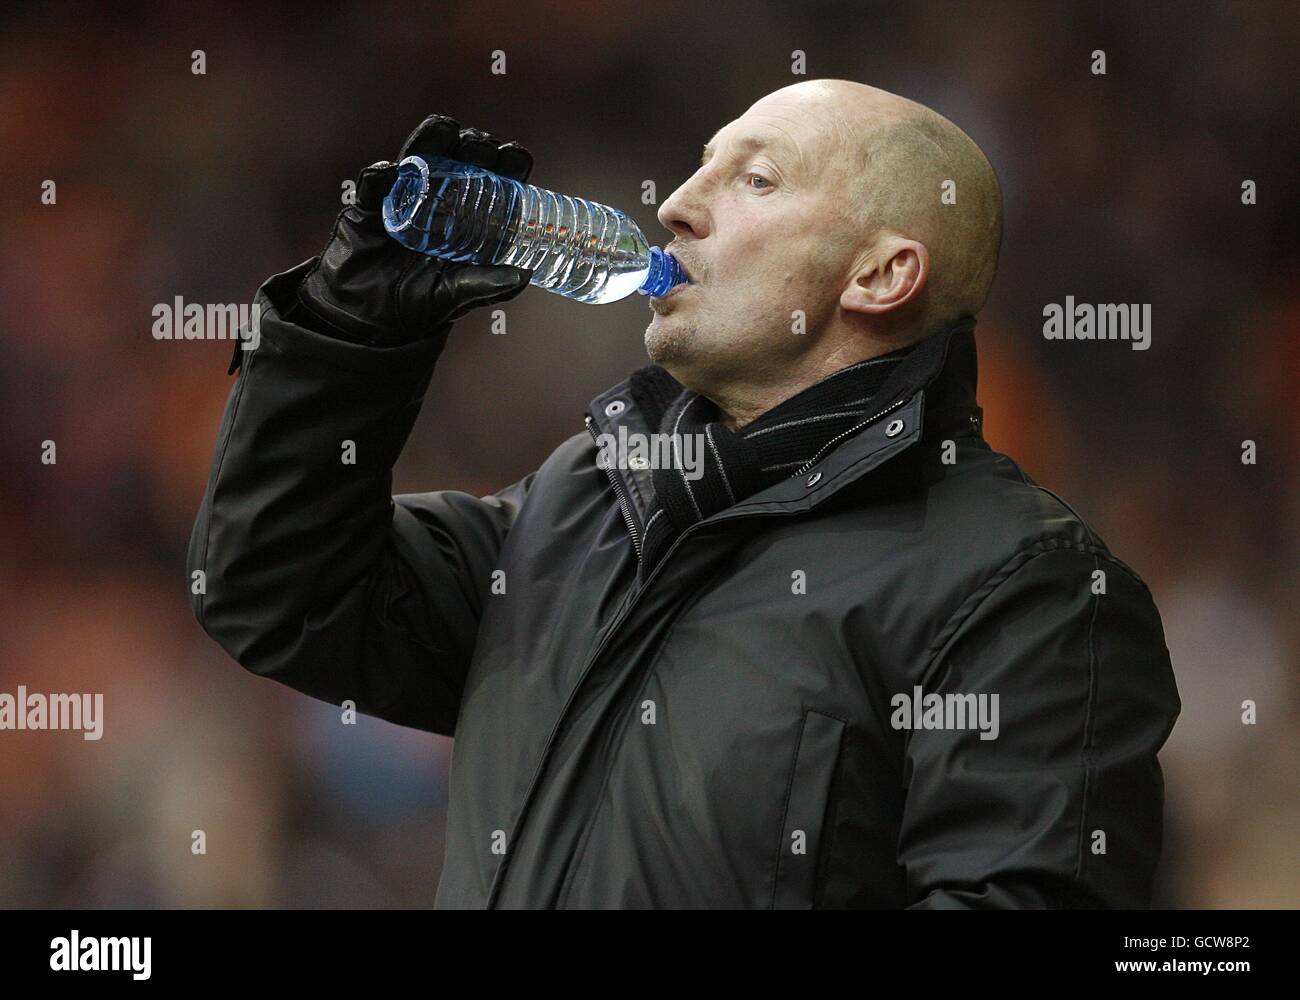 Soccer - Barclays Premier League - Blackpool v Wolverhampton Wanderers - Bloomfield Road. Blackpool manager Ian Holloway on the touchline. Stock Photo